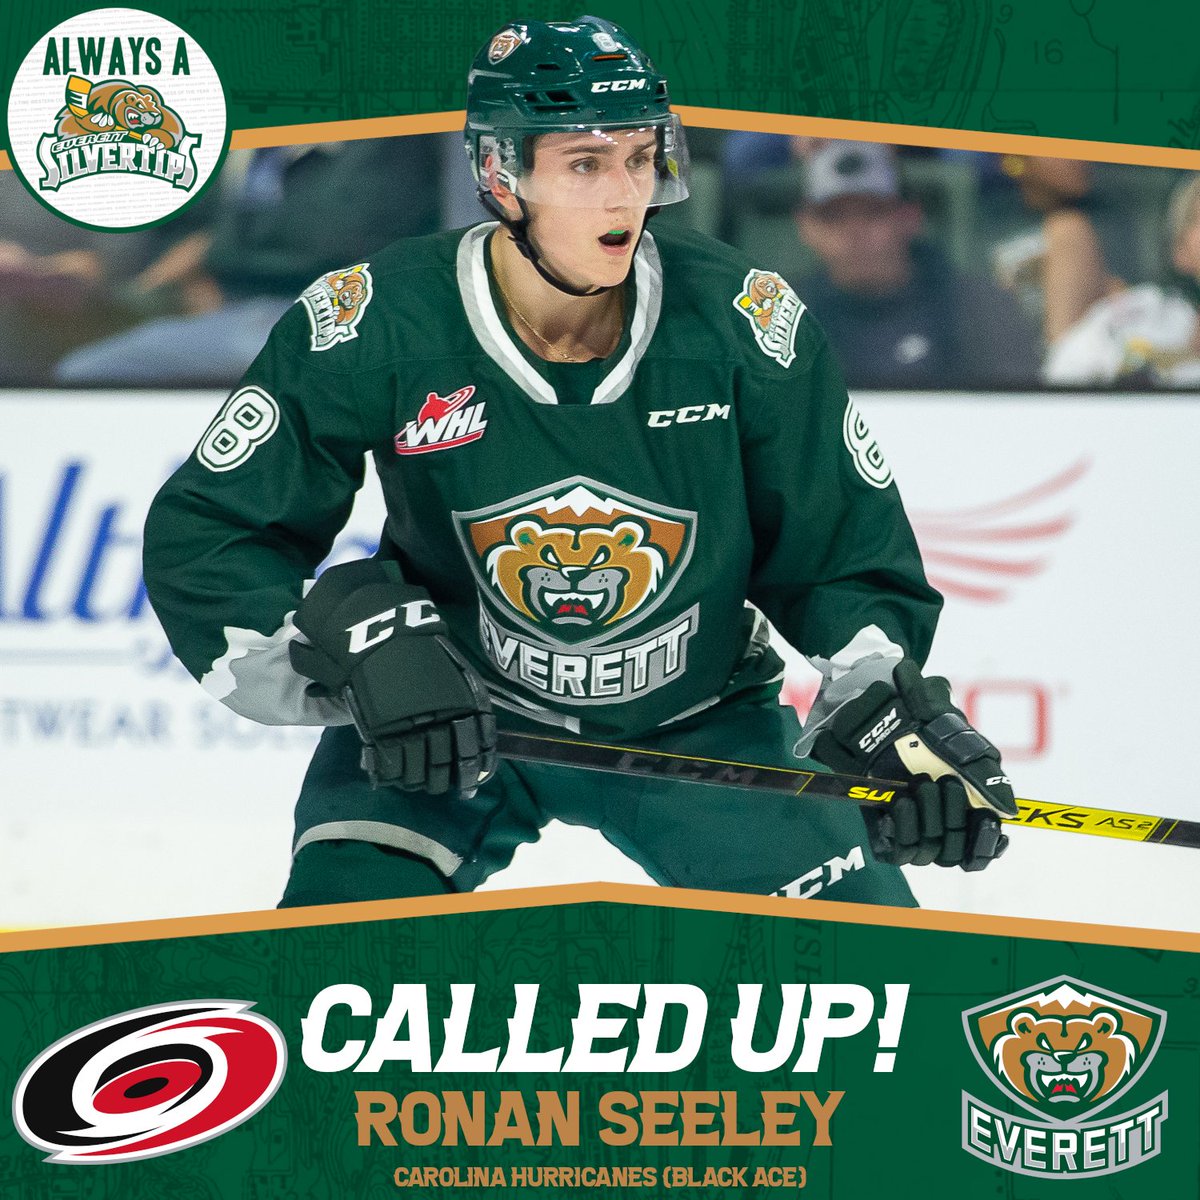 Catching up on some alumni news... D Ronan Seeley ('18-22) has been called up by @Canes as a black ace for the Stanley Cup Playoffs! #AlwaysASilvertip